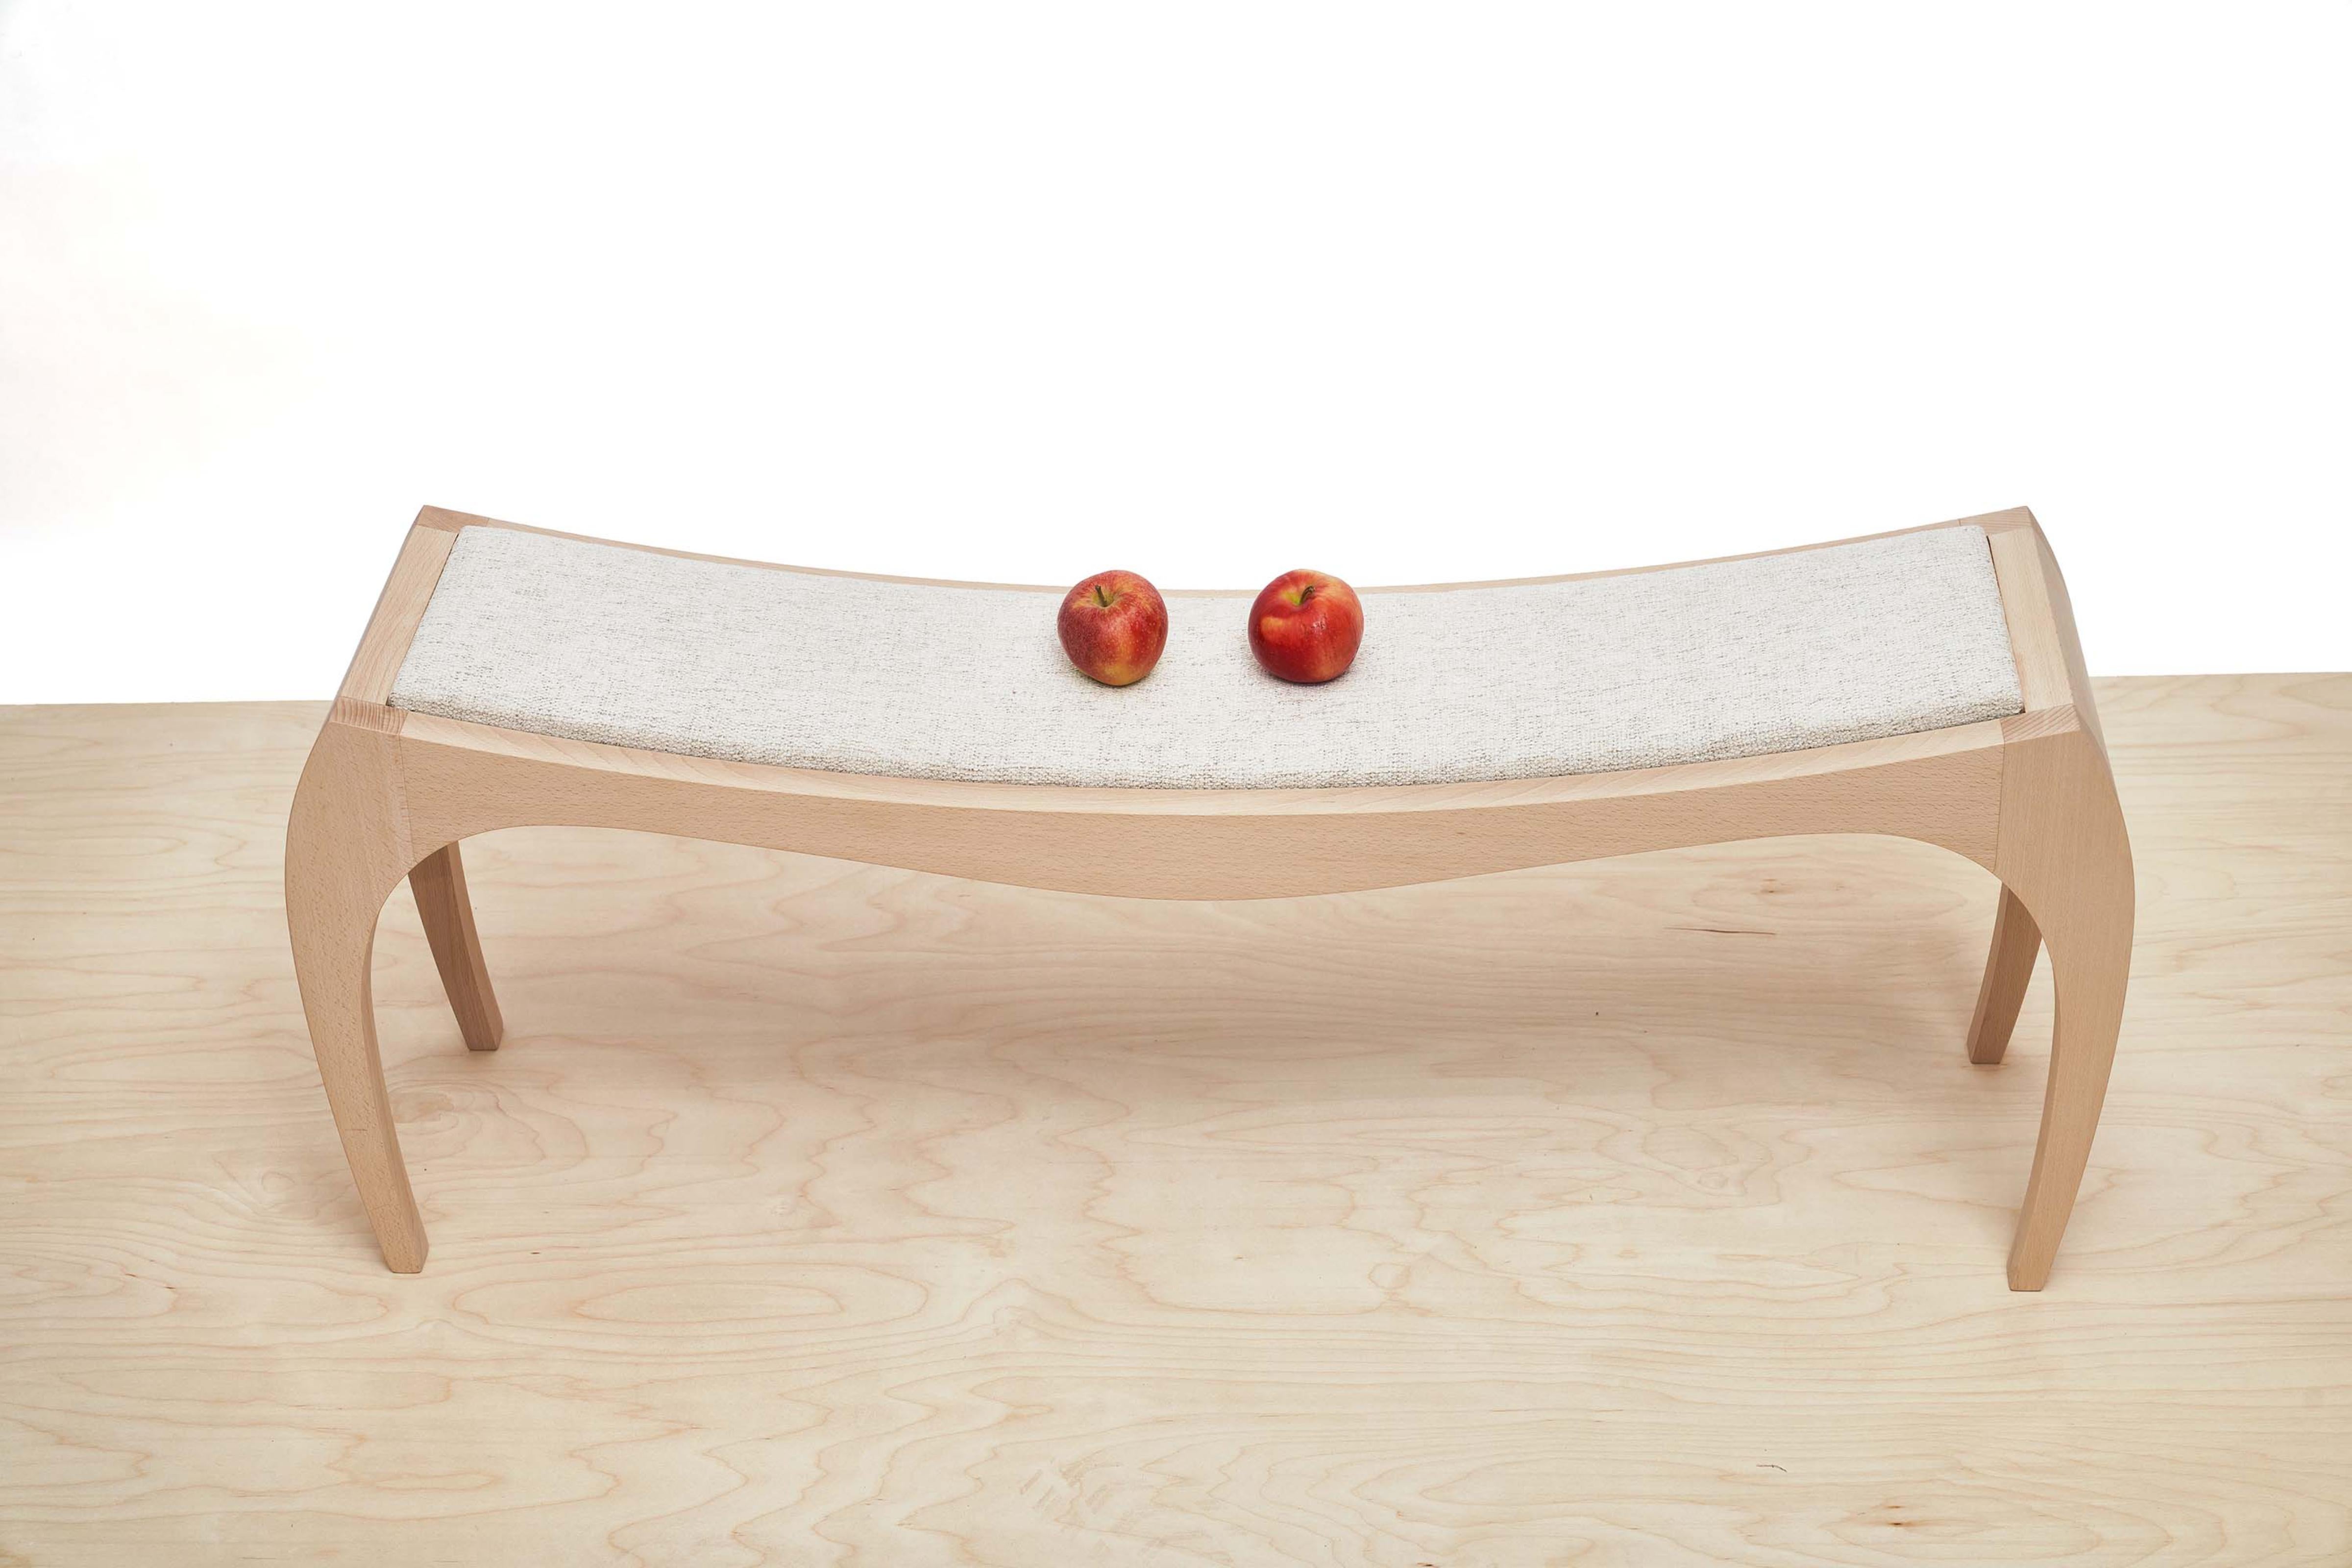 SURF bench by Jean-Baptiste Van den Heede.
Dimensions: L 118 x D 31 x H 42 cm.
Materials: White Beech, Textile.
Also available: Other textiles available.

The upholstered RUMBO version proposes a stool with quality fabrics to your liking. It